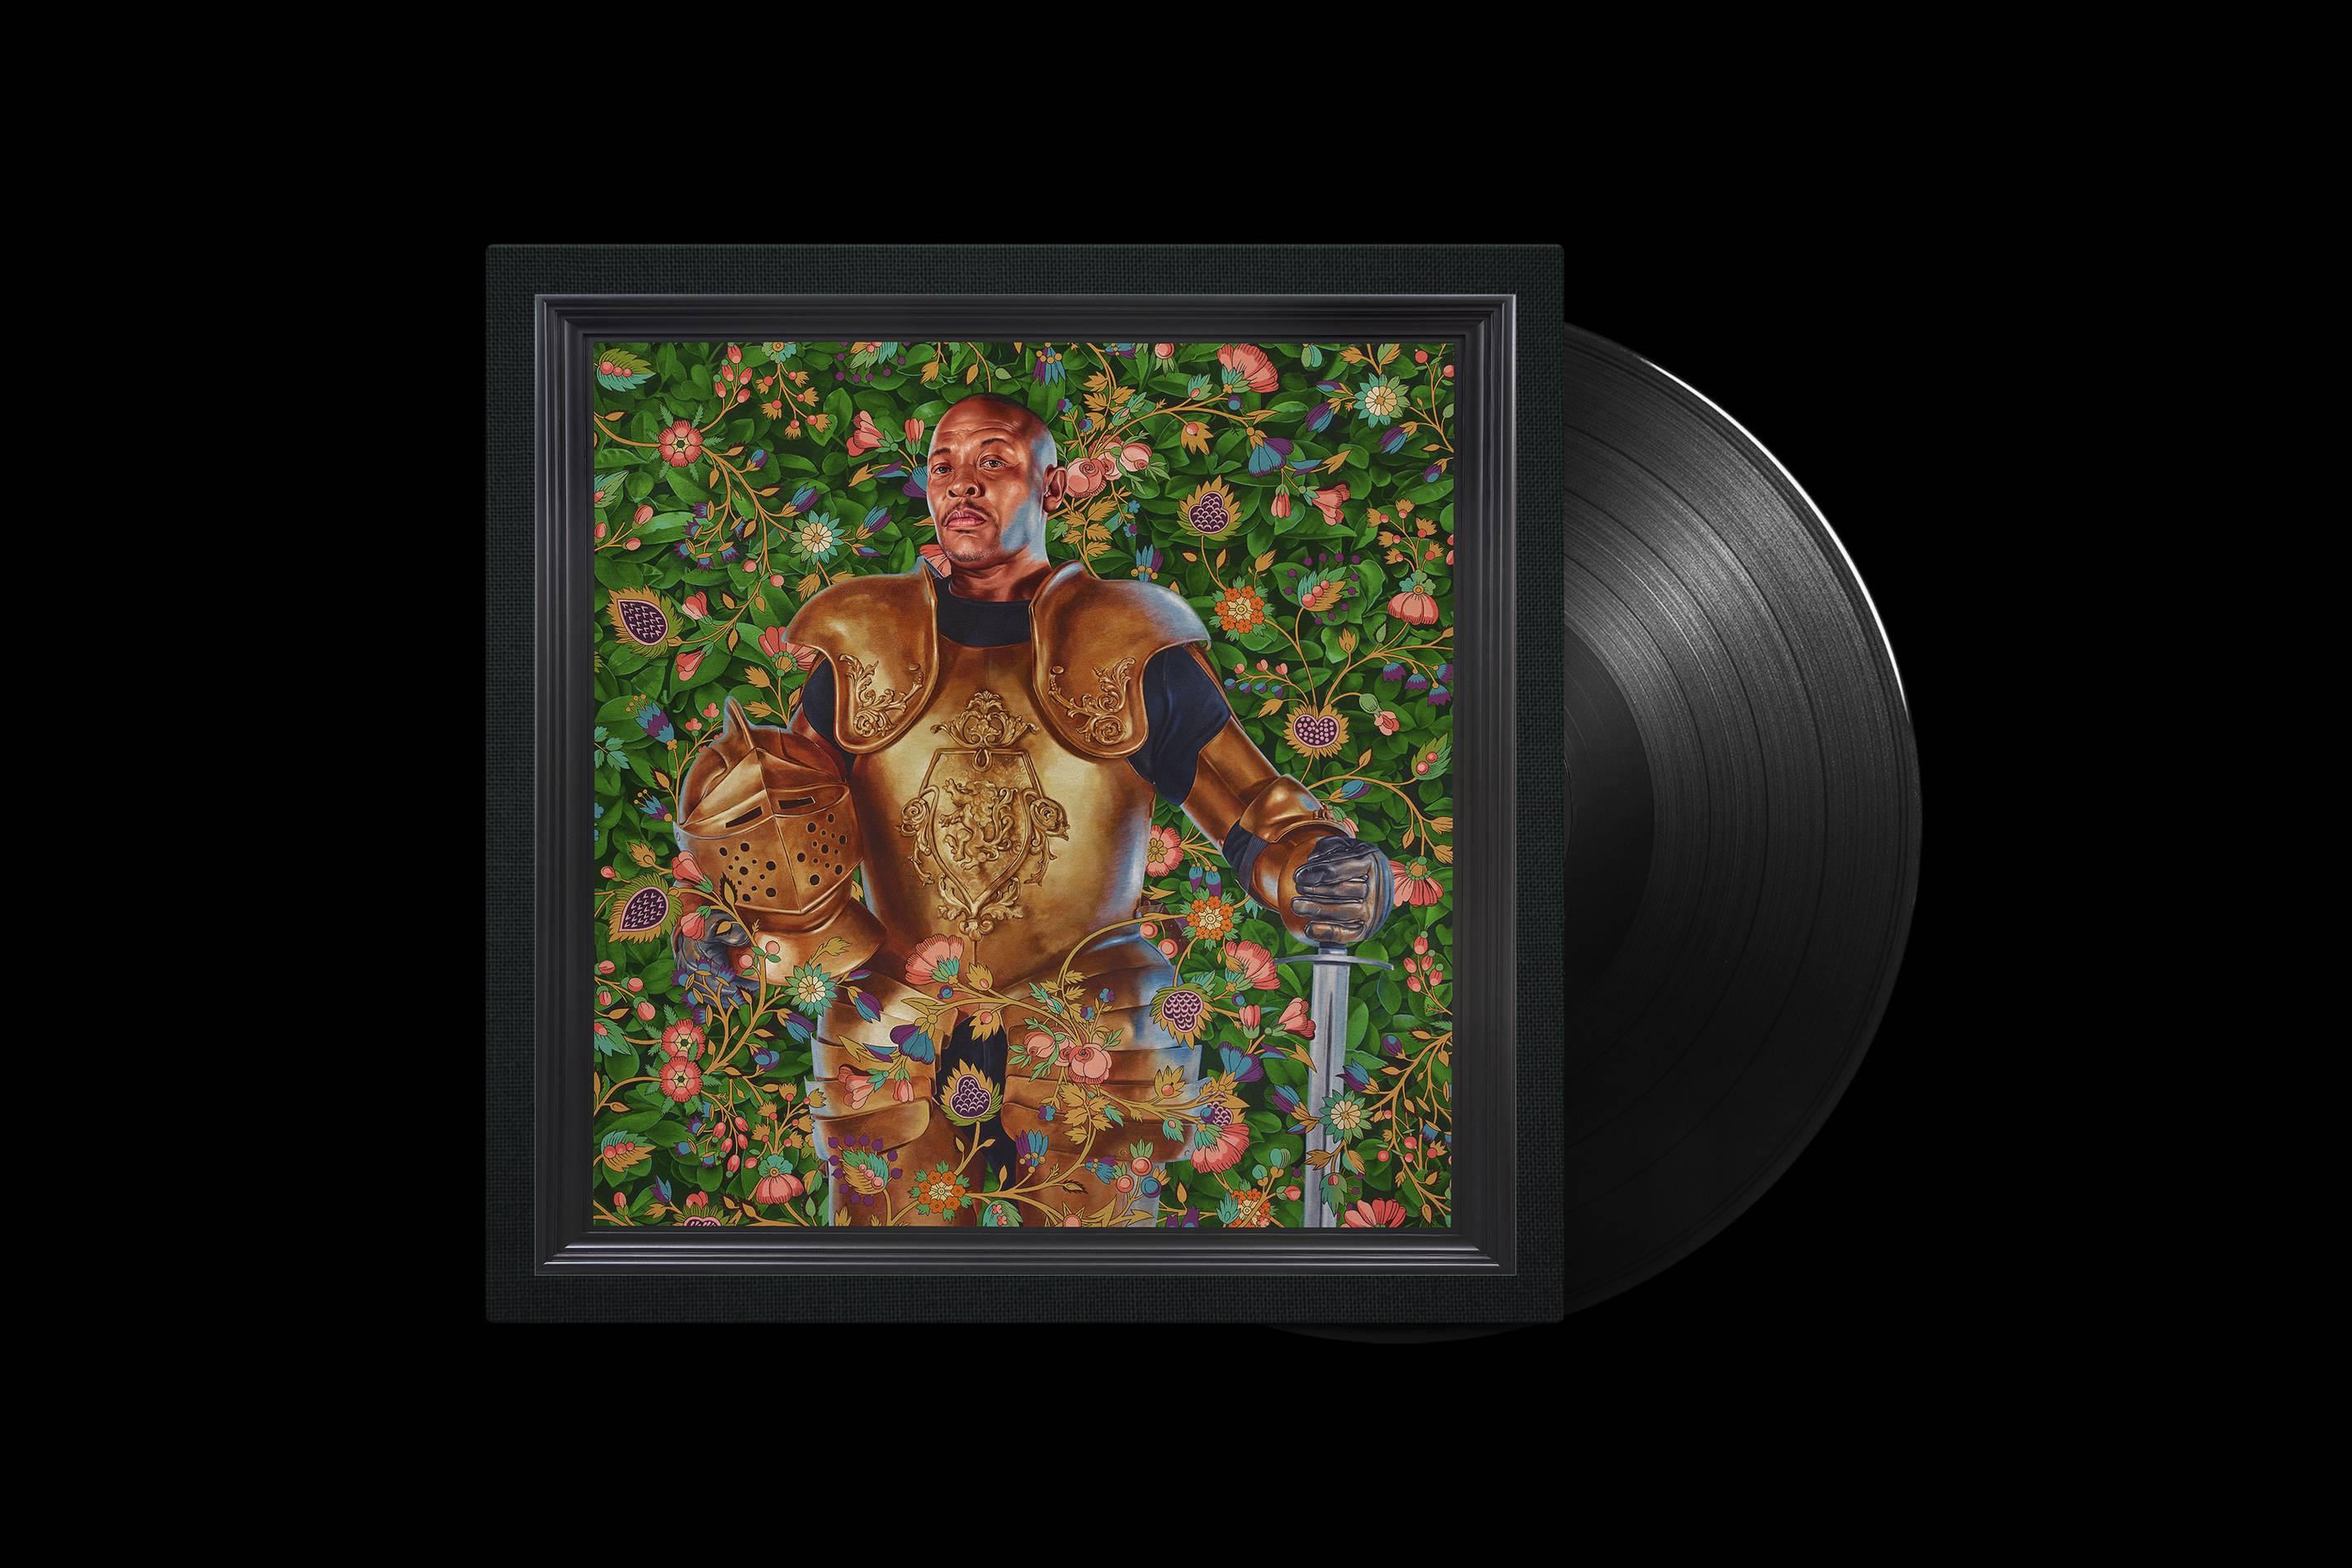 Interscope x Dr. Dre album art by Kehinde Wiley